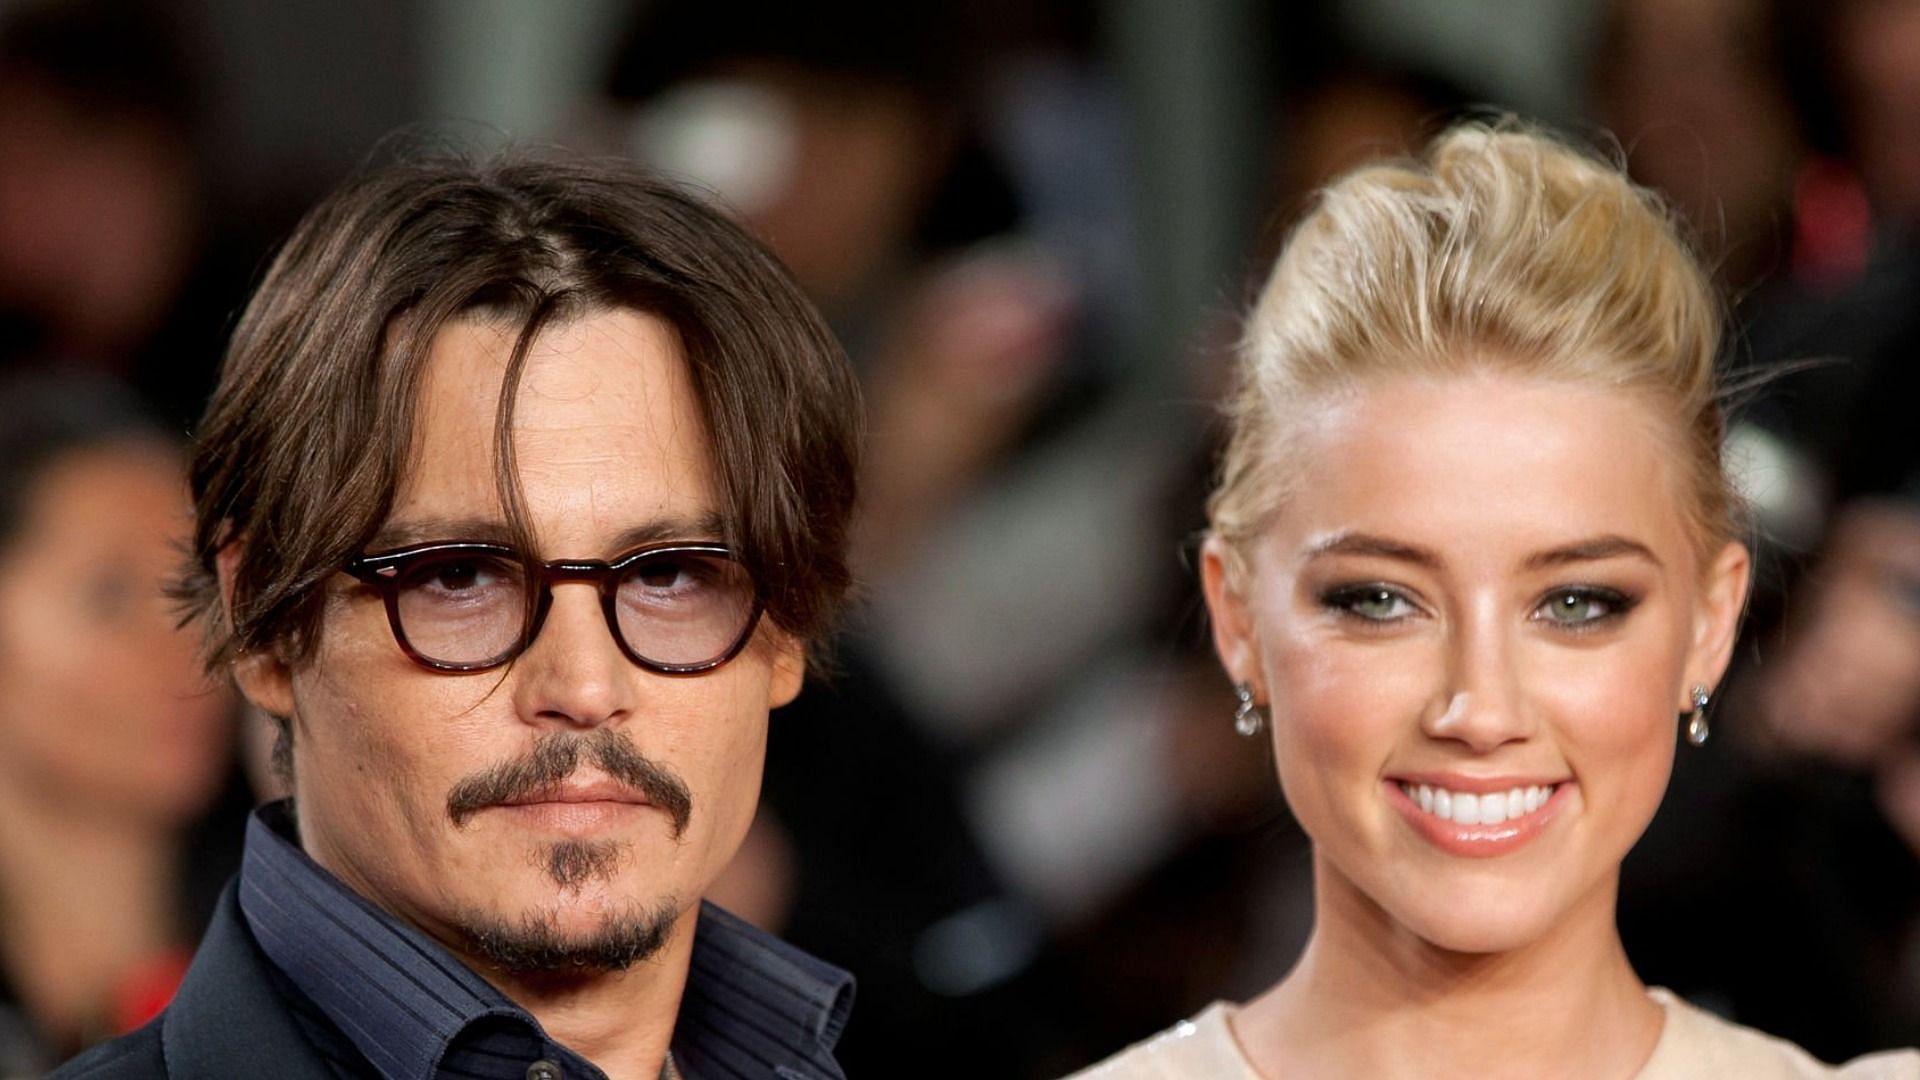 An audio clip containing an old conversation between Amber Heard and Johnny Depp surfaced online (Image via Getty Images)